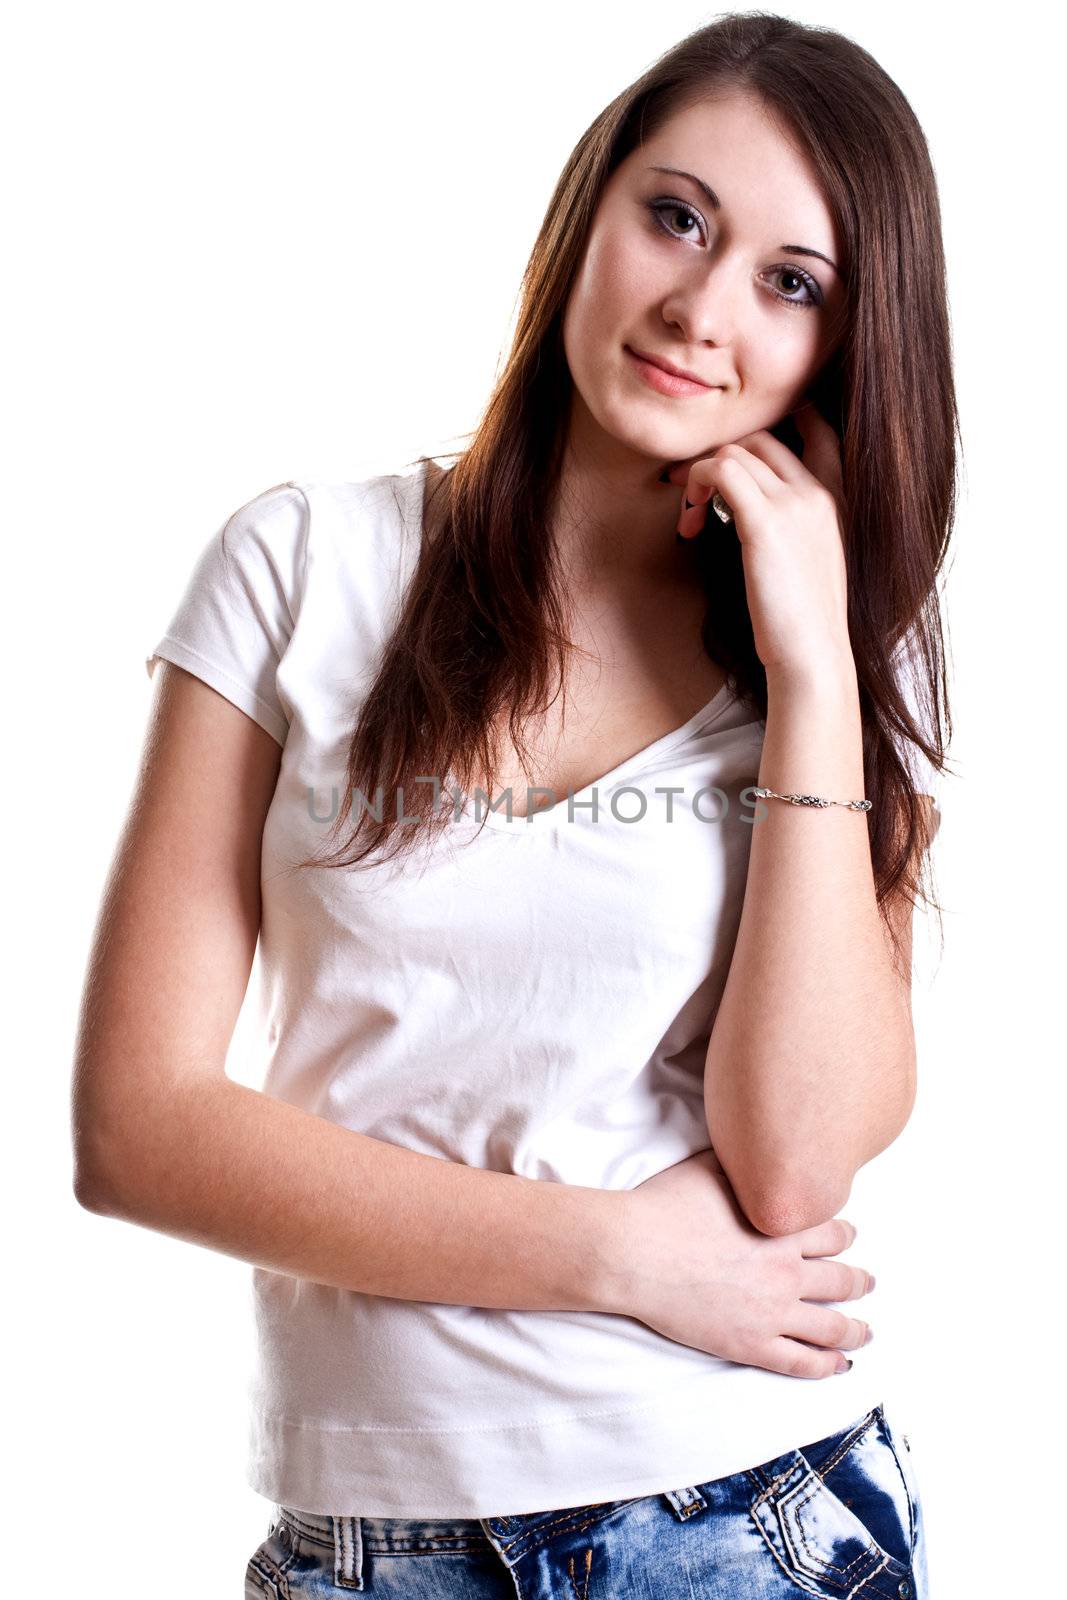 smiling young woman posing on a white background